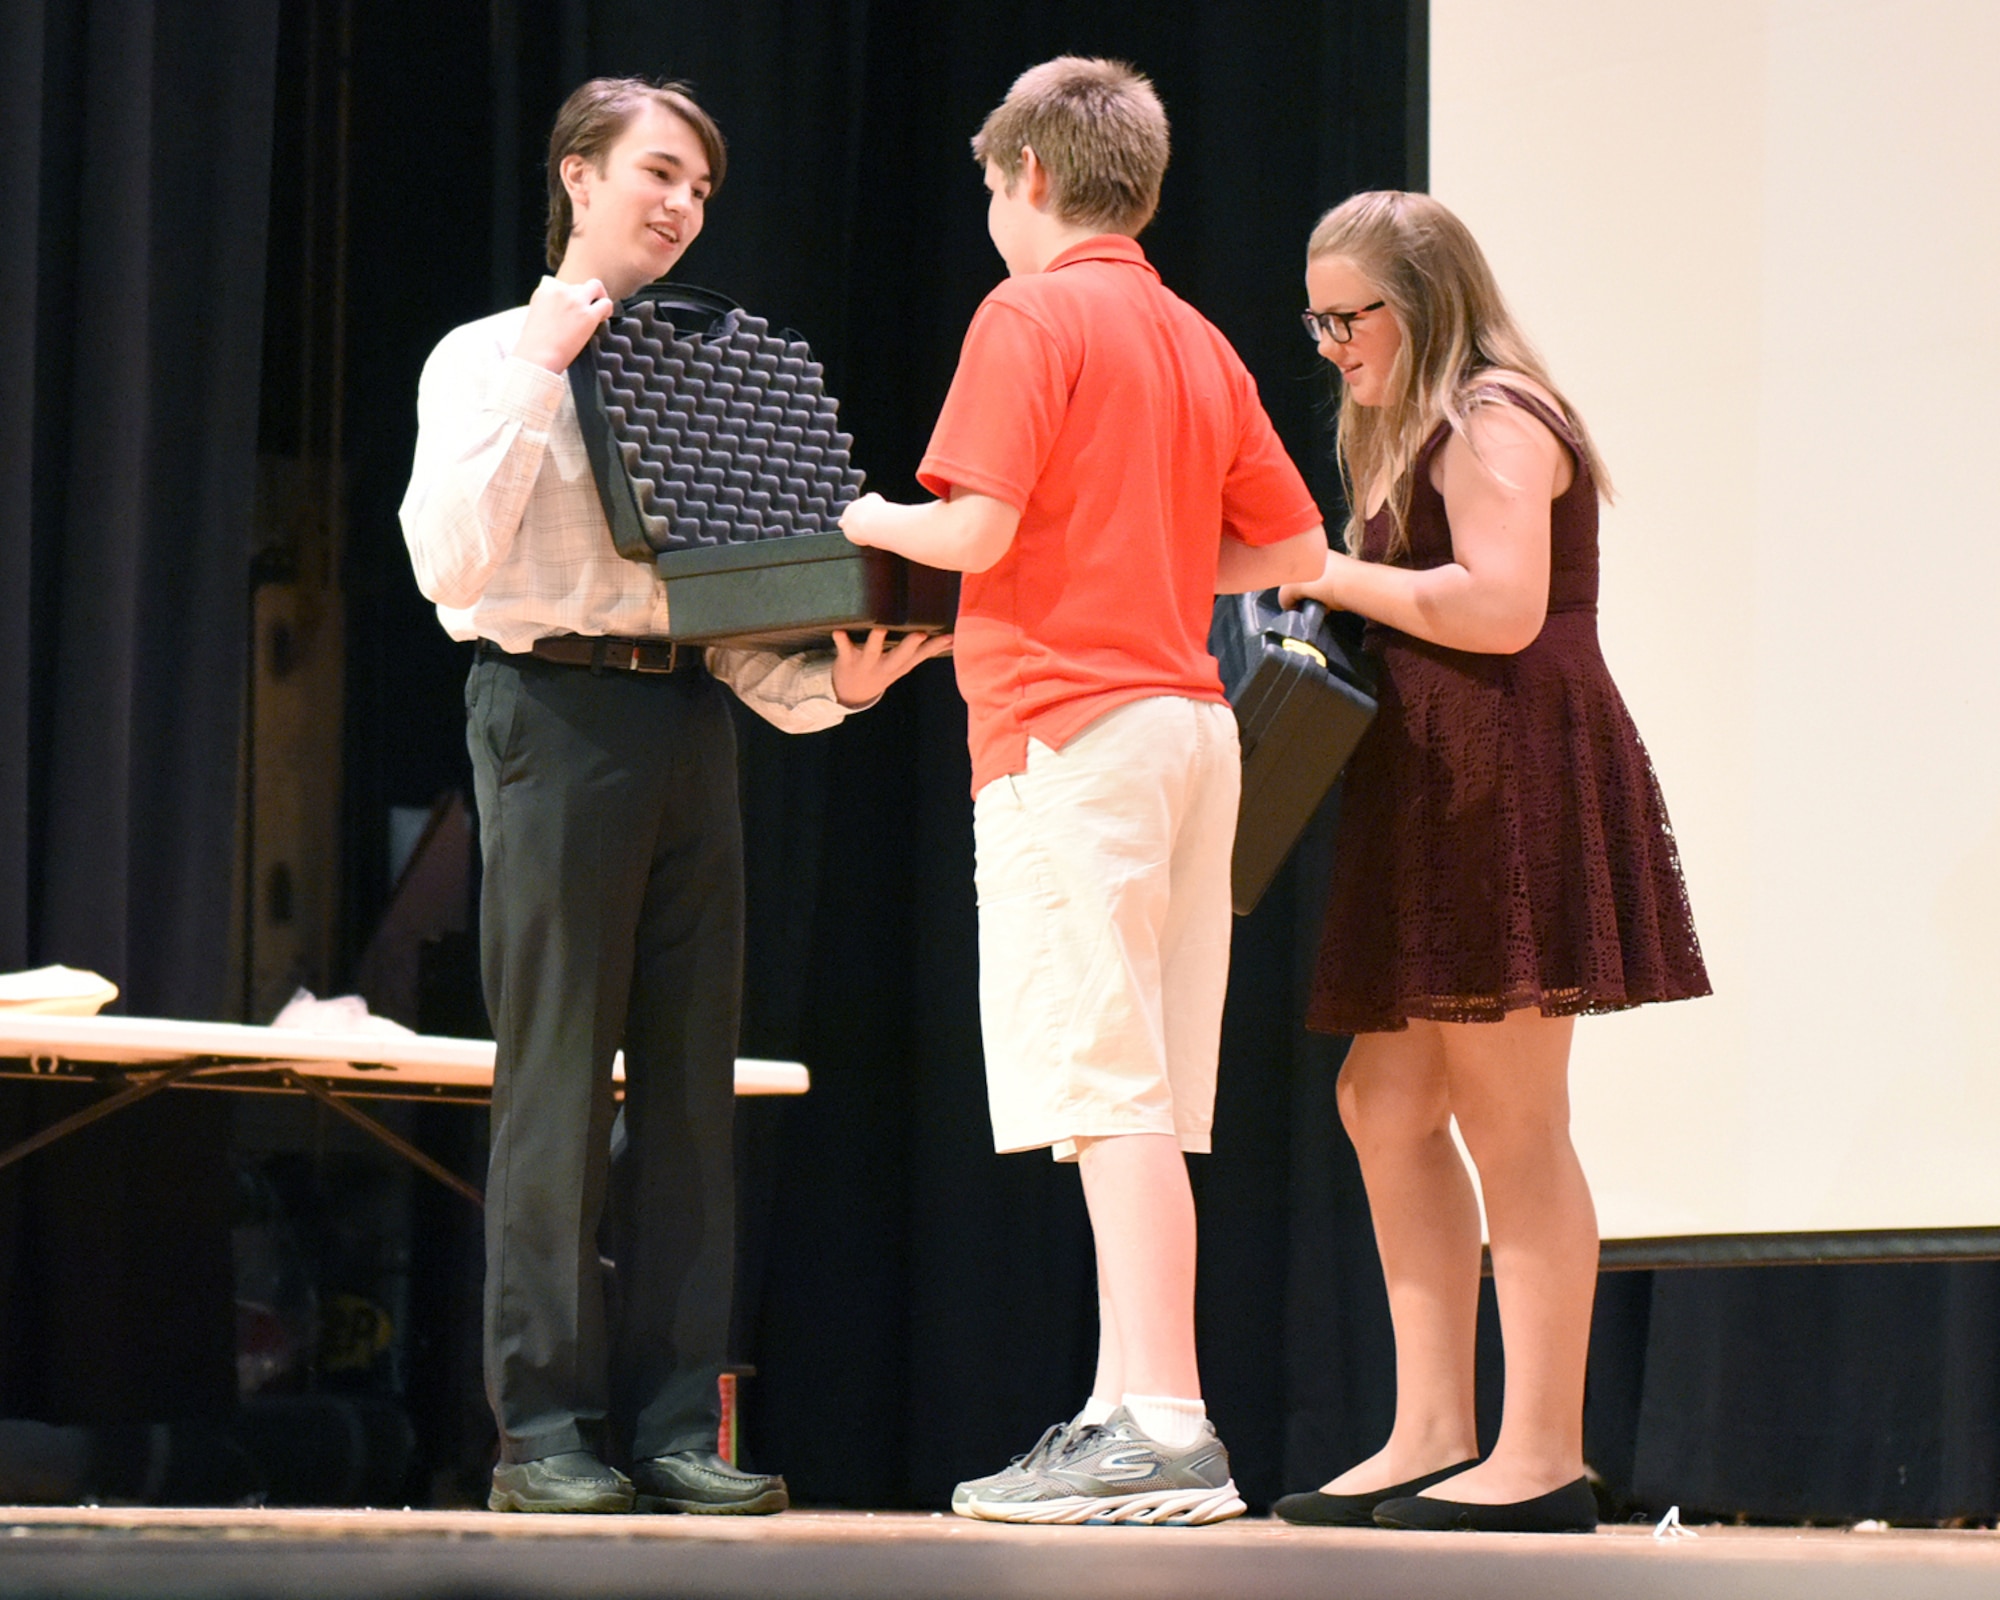 Nick Brown, a freshman at Pine Grove Area High School, Pine Grove, Penn., presents a 3D printer prosthetic device that he designed to Andrew (A.J.) Mindy, a middle school student and son to Pennsylvania Air National Guardsmen Senior Master Sgt. Susan Mindy, who is currently deployed June 7, 2016.  Sgt. Mindy was Skyped into the presentation that will allow her son who was born with only one hand to be able to play musical instruments and continue being a musician. (U.S. Air National Guard photo by Master Sgt. Matt Schwartz/Released)